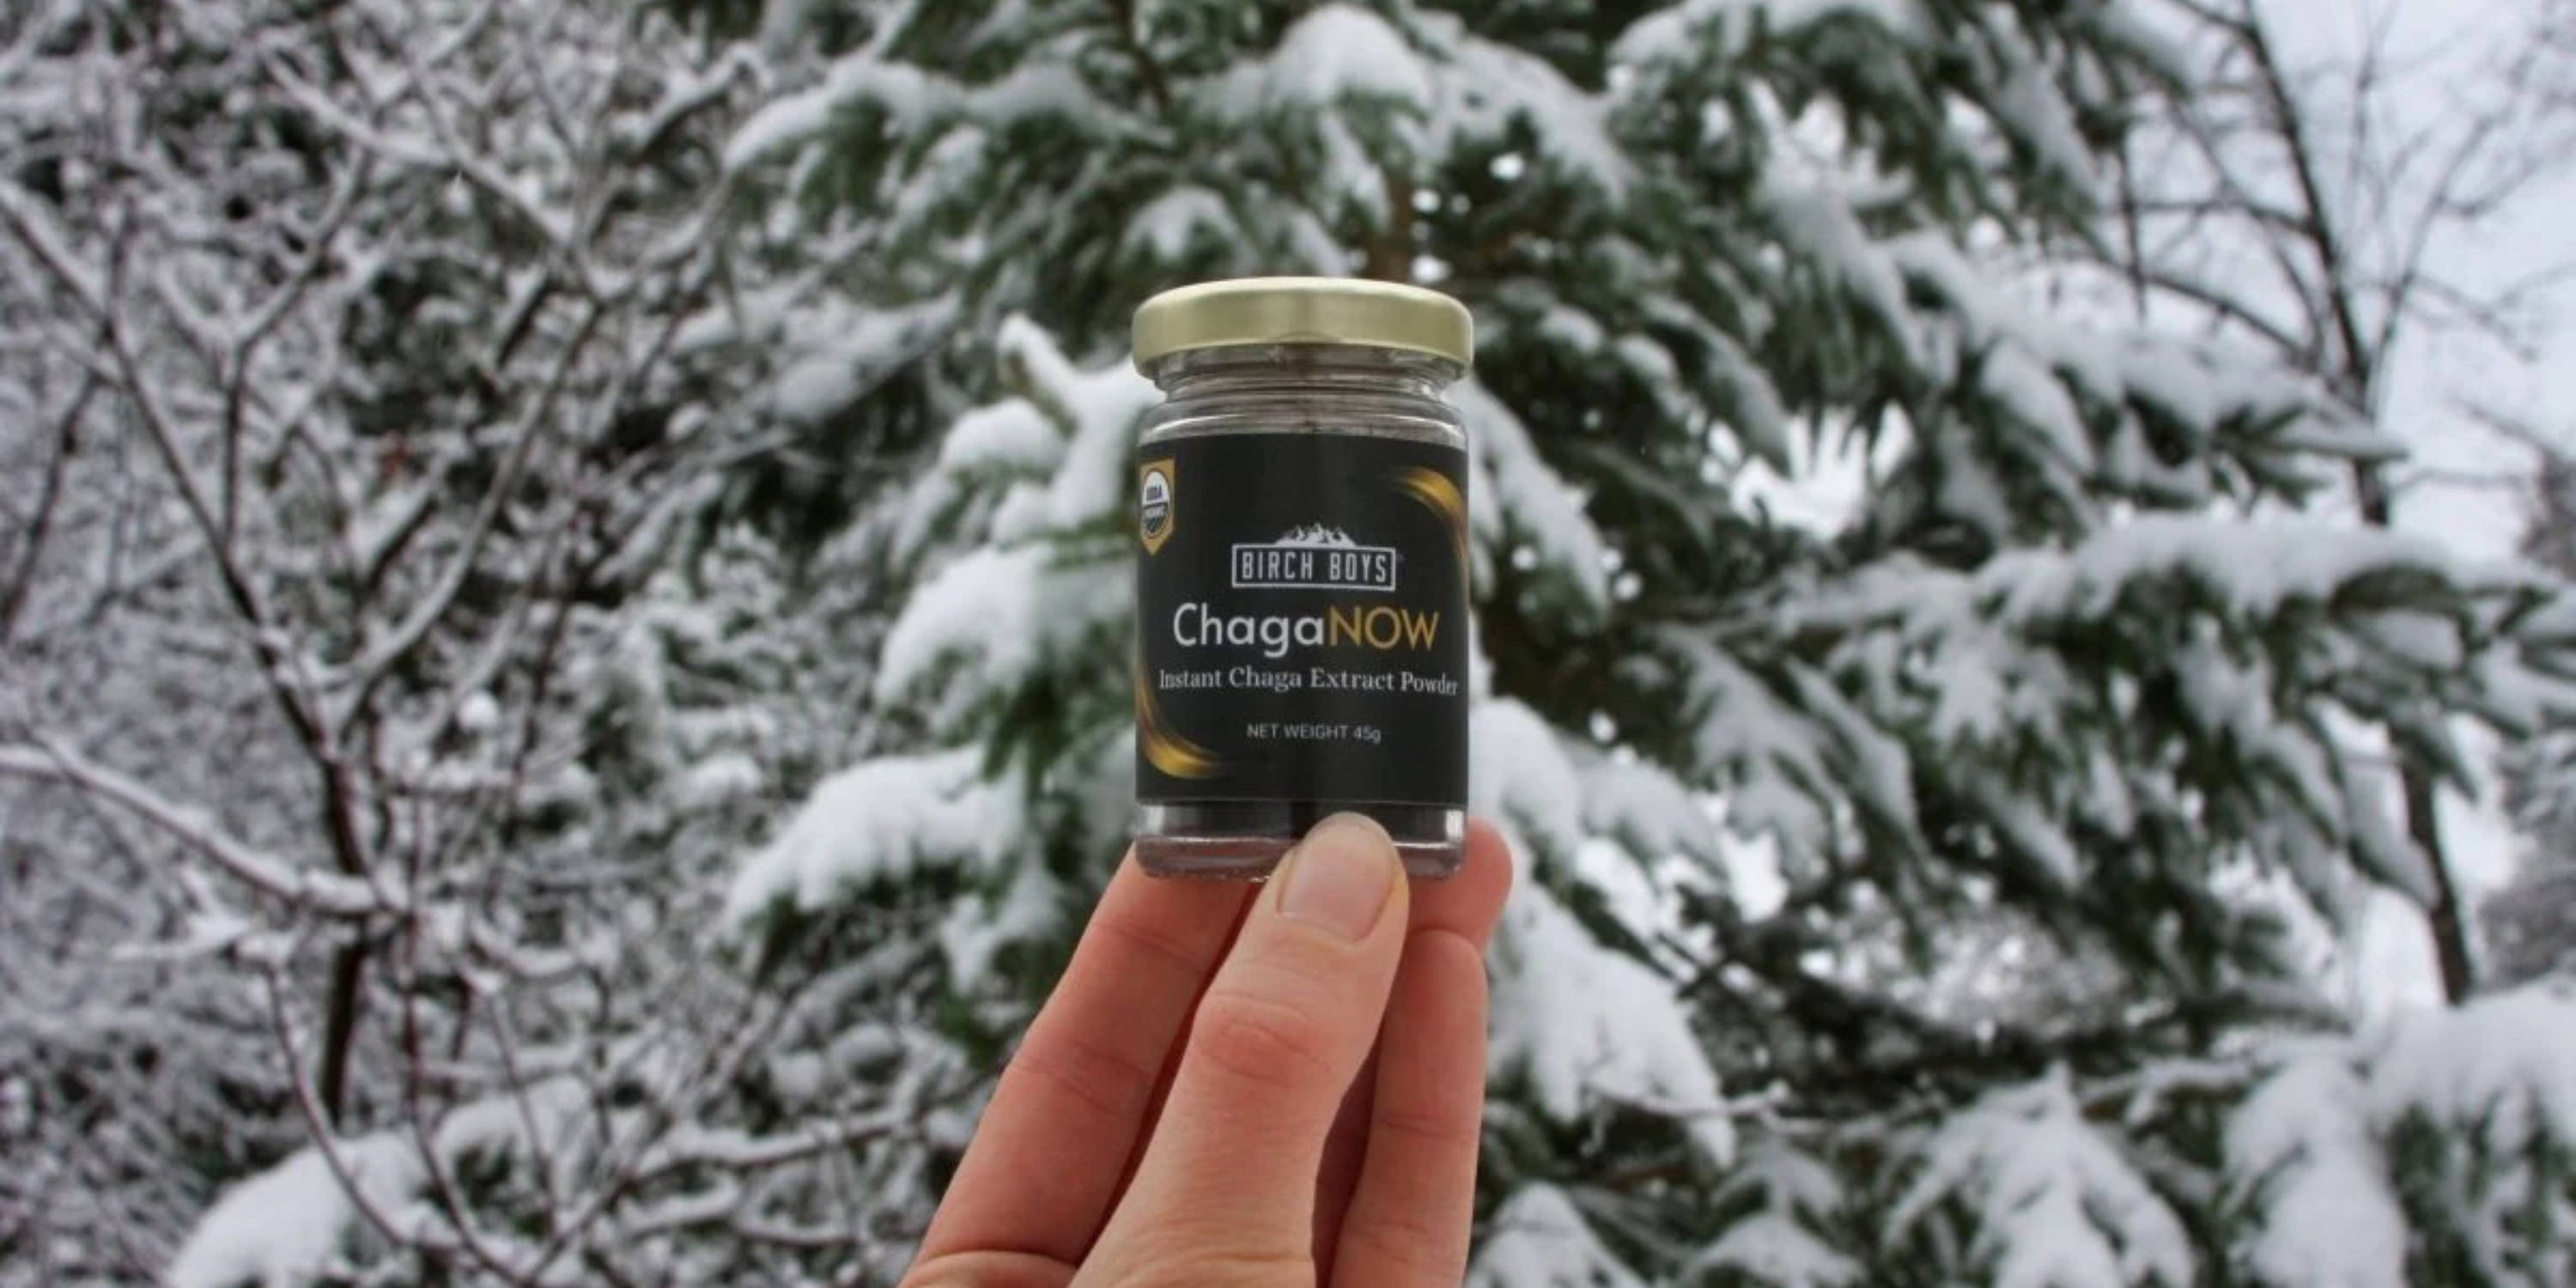 ChagaNOW Instant and Wild Chaga Extract Powder being held in front of a snowy scene